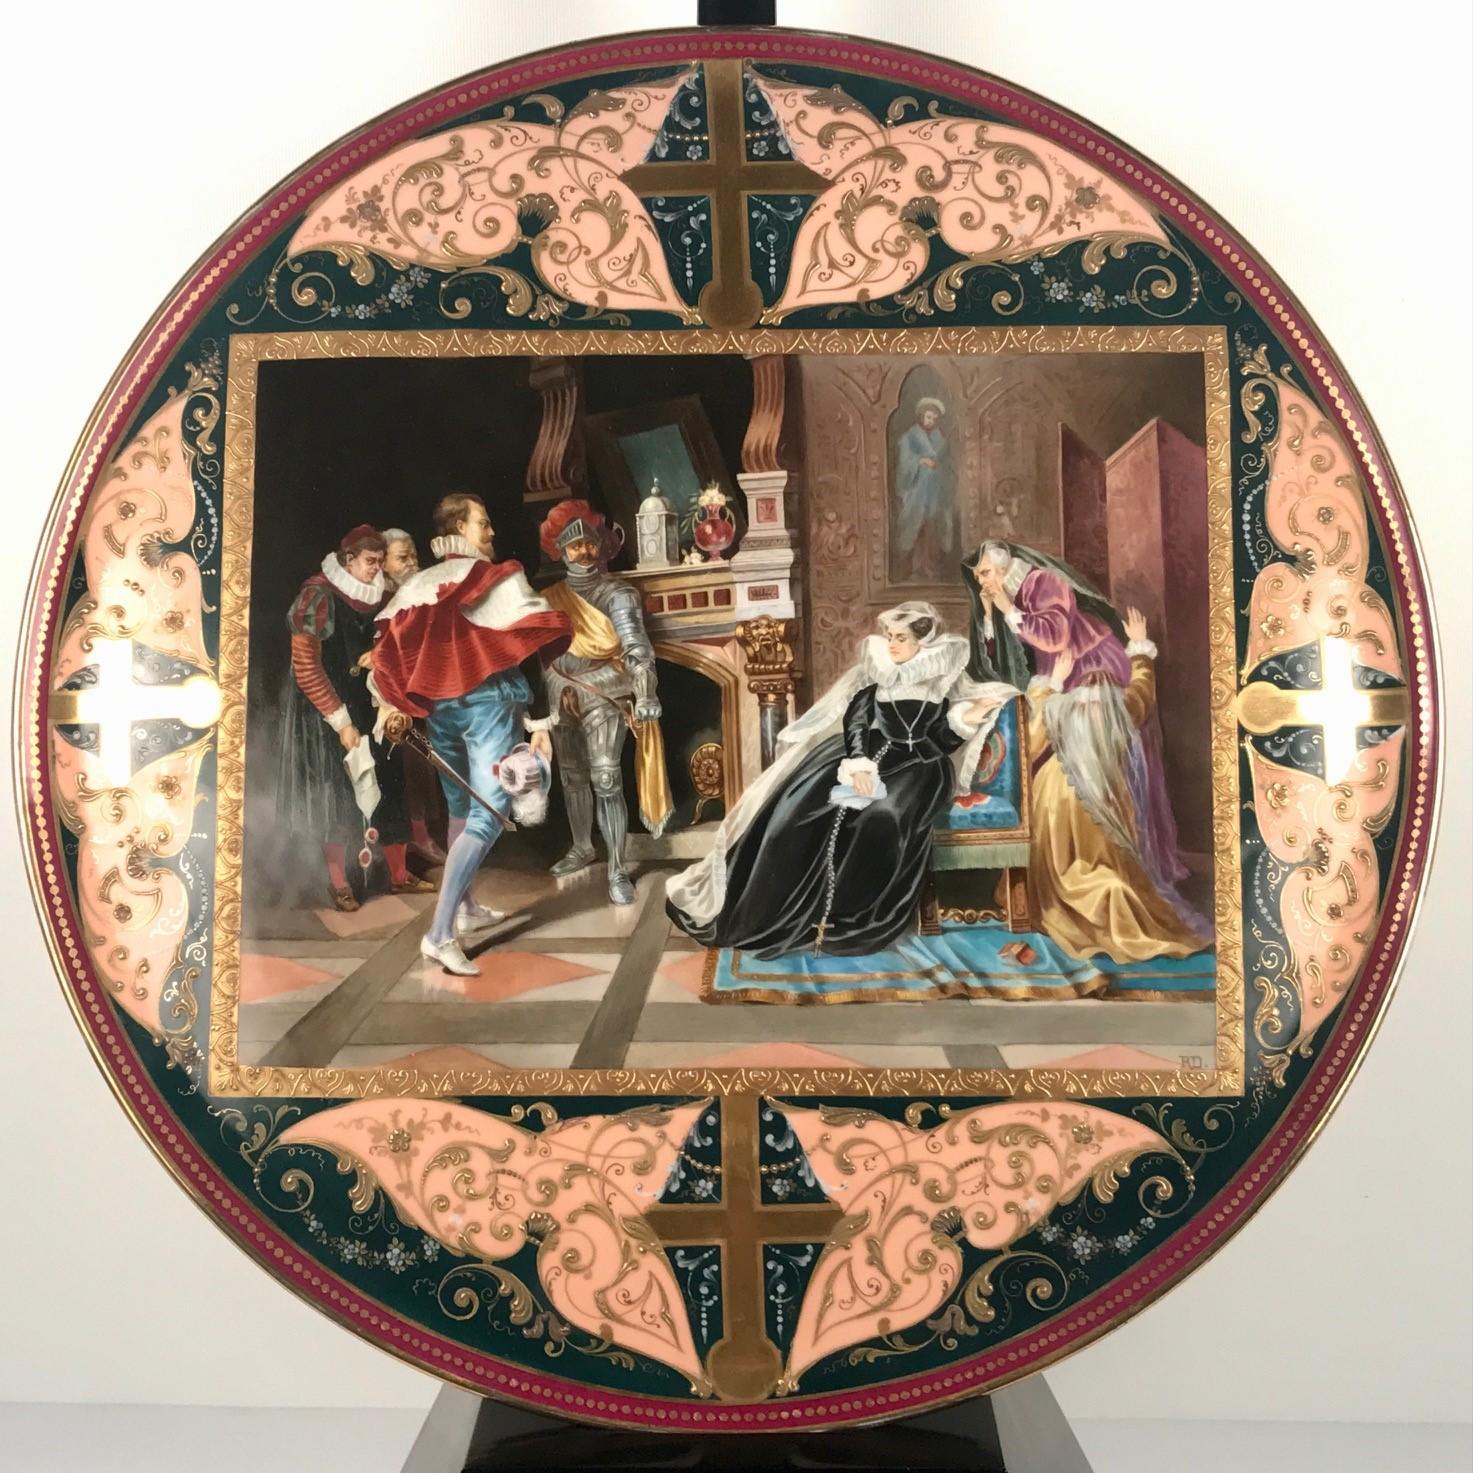 Vienna porcelain hand-painted circular charger portraying Mary, Queen of Scots being told of her impending execution, within a rectangular gilt beaded frame and dark green ground surround with foliate and floral motifs under- and overglazed.